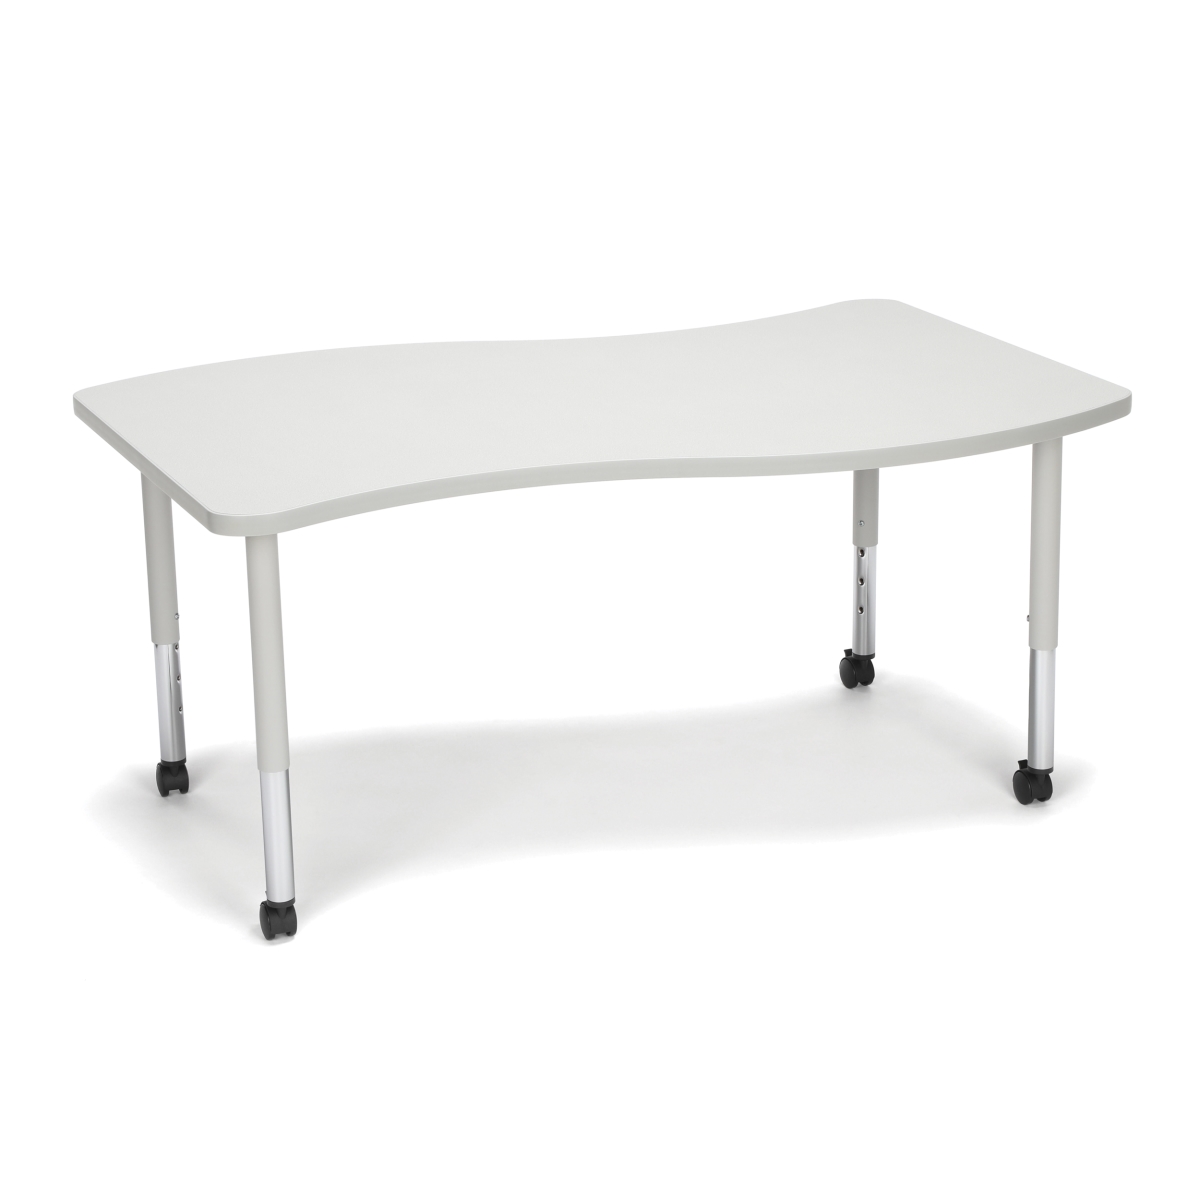 Wave-l-slc-grynb Adapt Series Large Wave Student Table - 20-28 In. Height Adjustable Desk With Casters, Gray Nebula